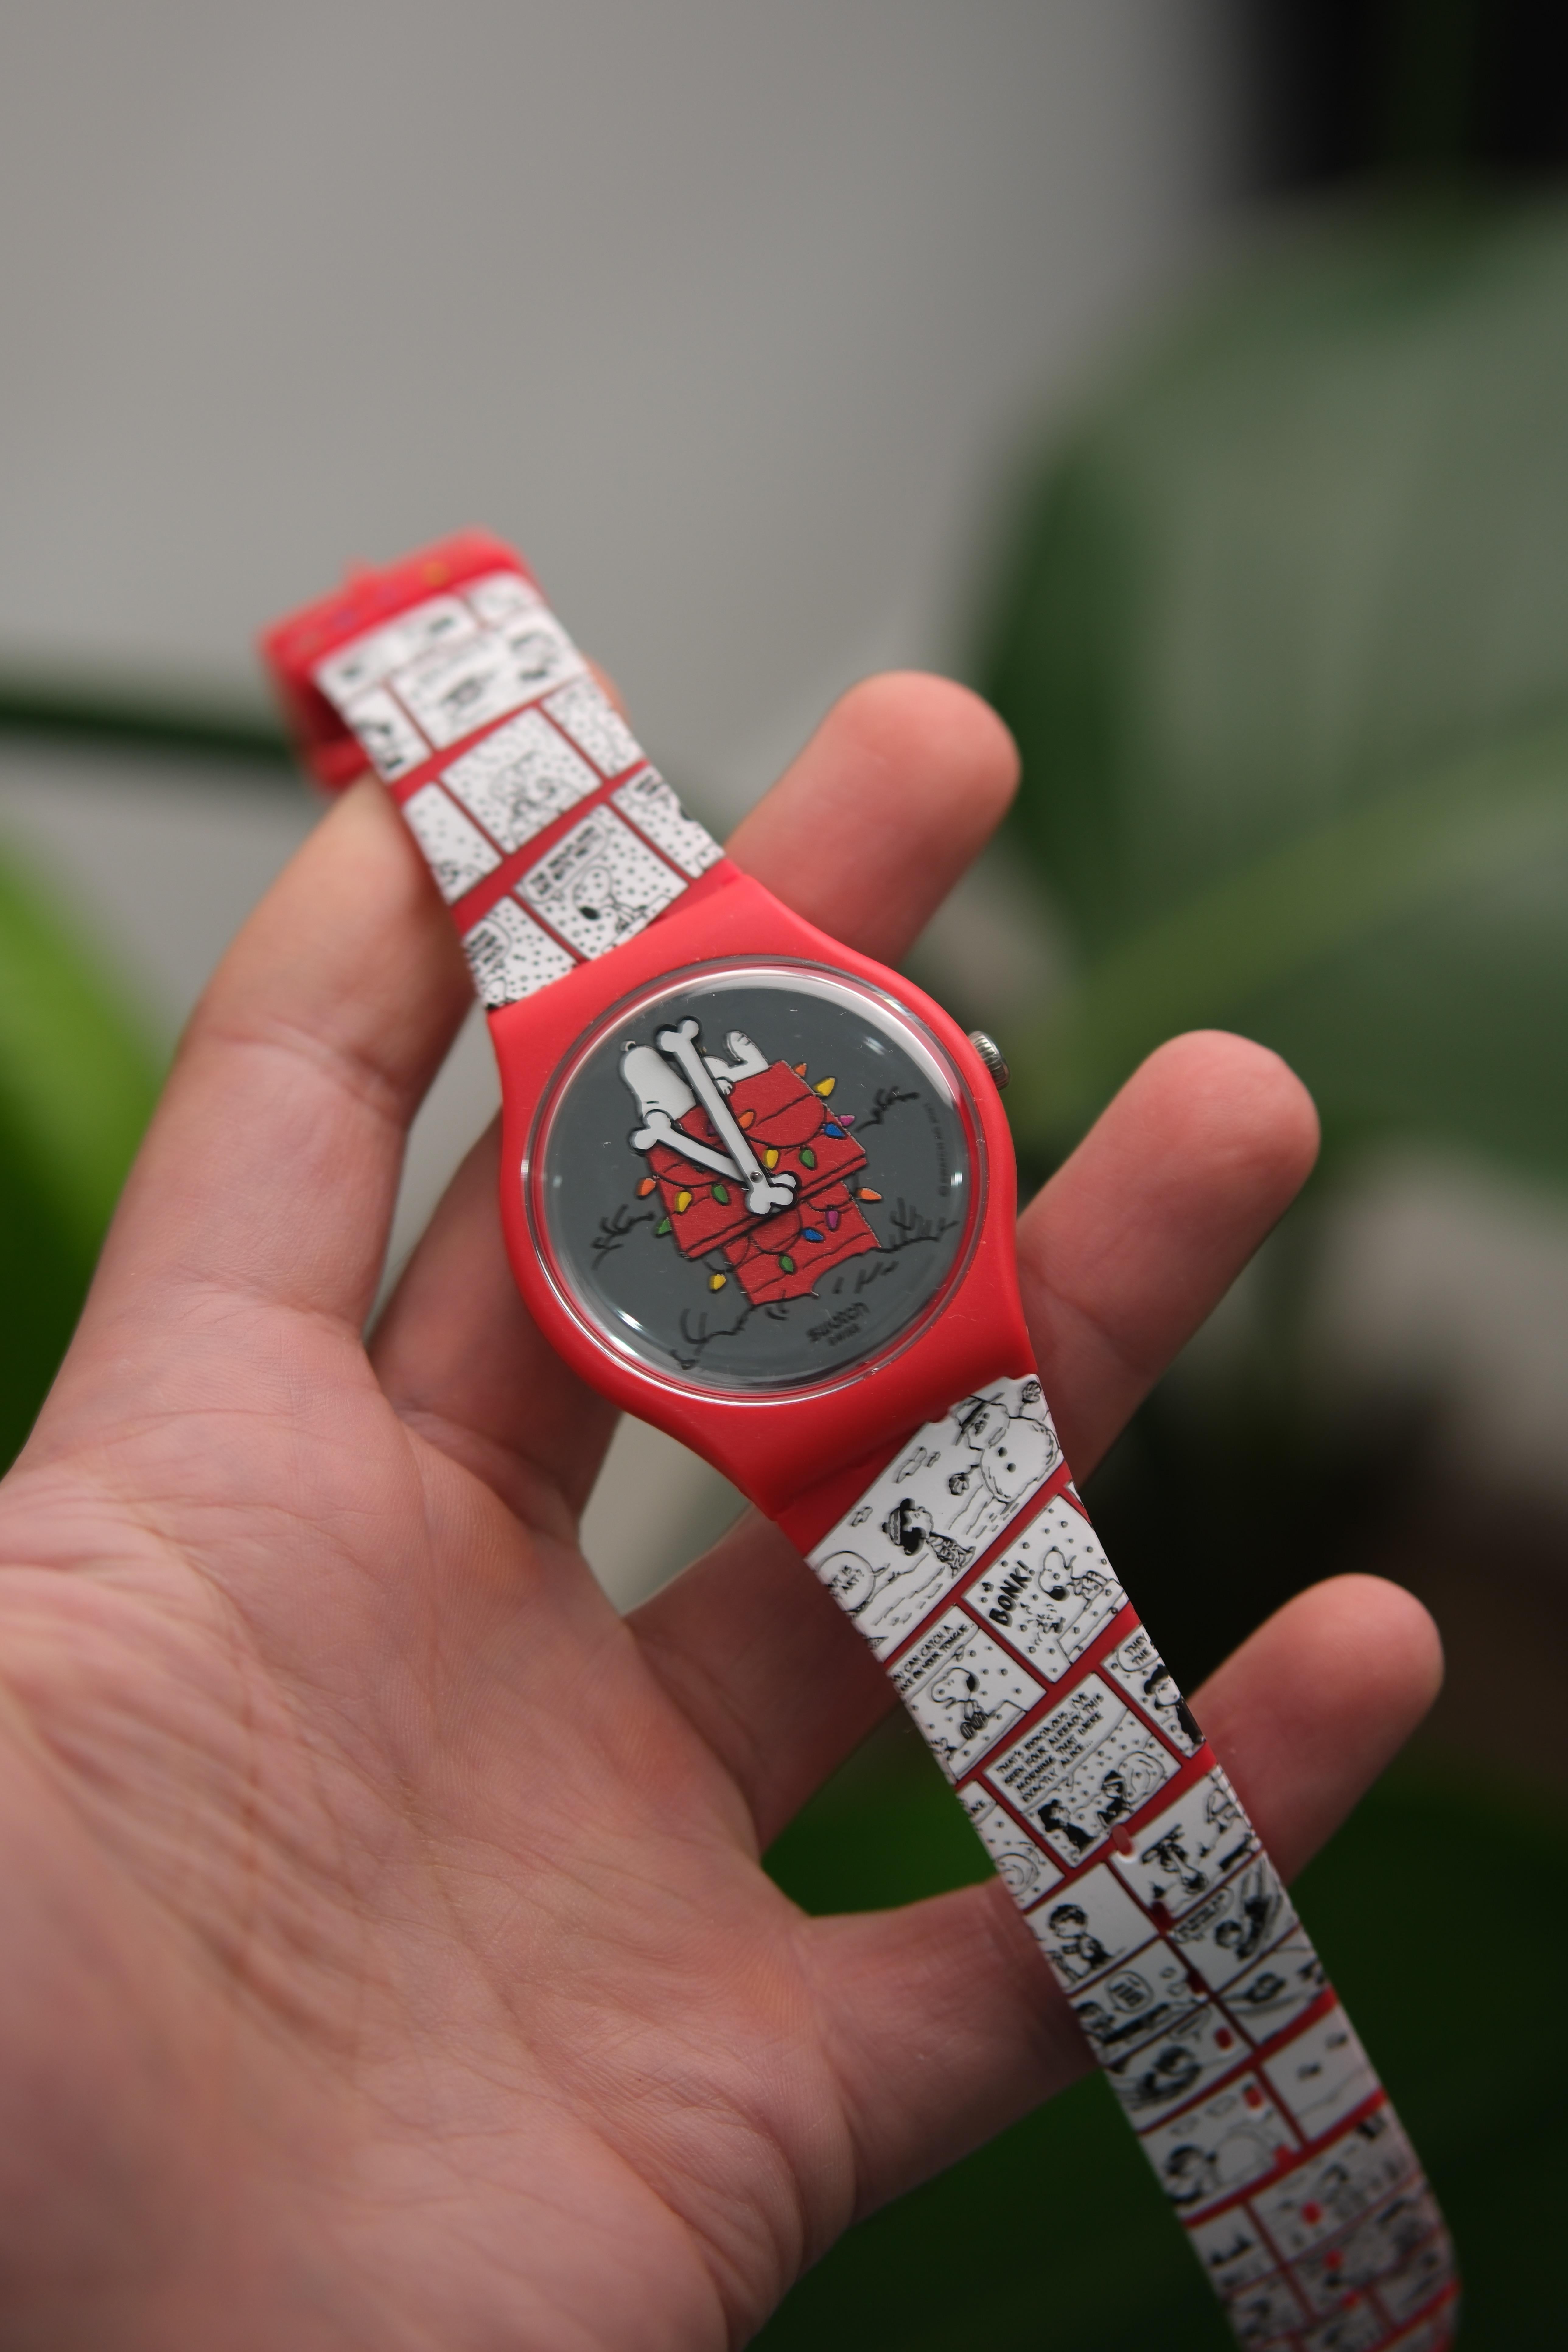 WTS] Swatch X PEANUTS SNOOPY CHOMP! Holiday Special Edition Watch